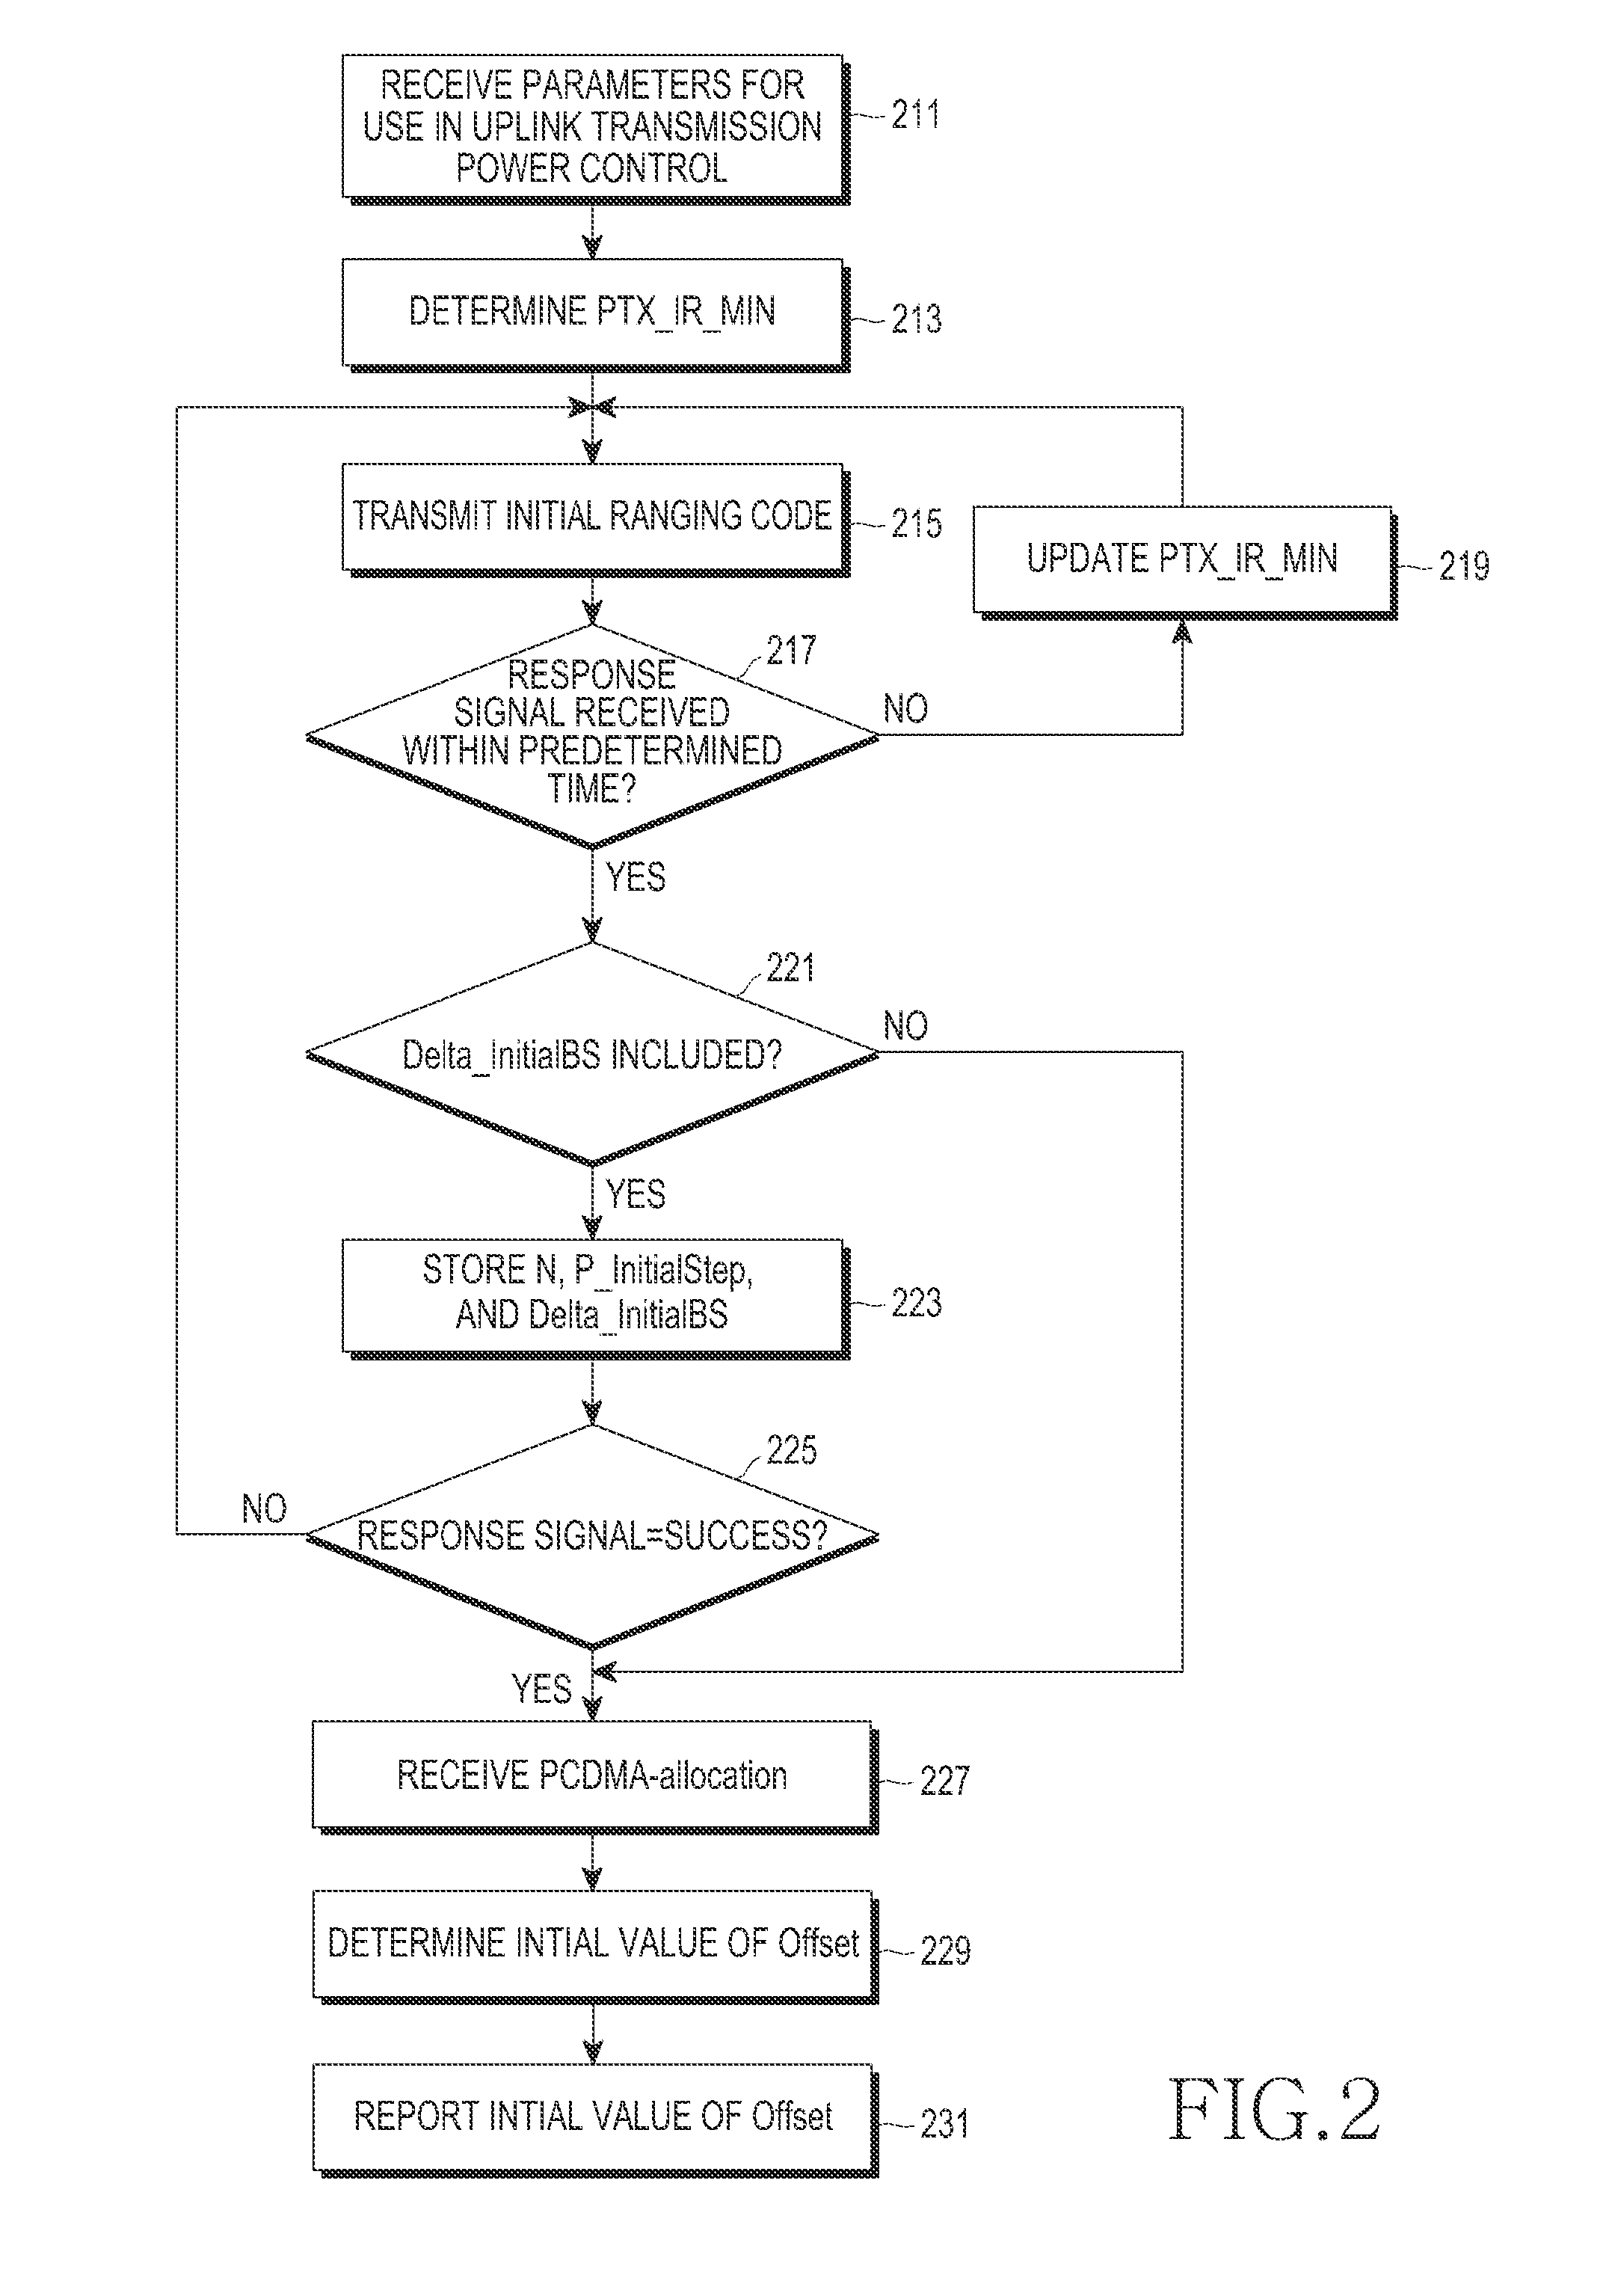 Apparatus and method for controlling uplink transmission power in a mobile communication system